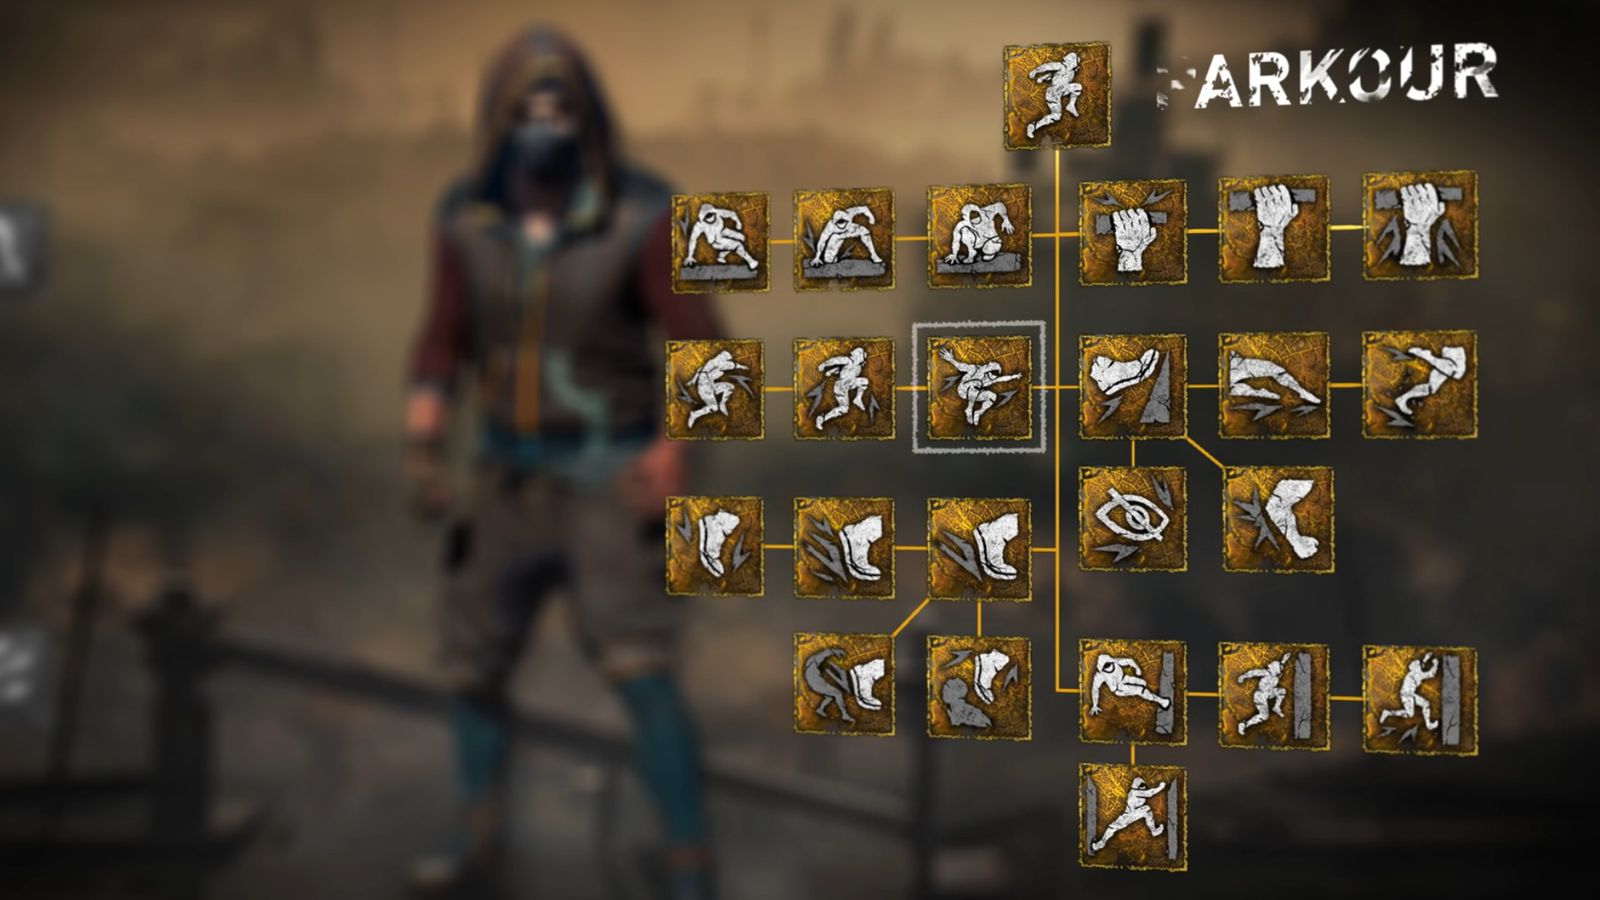 Dying Light 2 Parkour Skill Tree